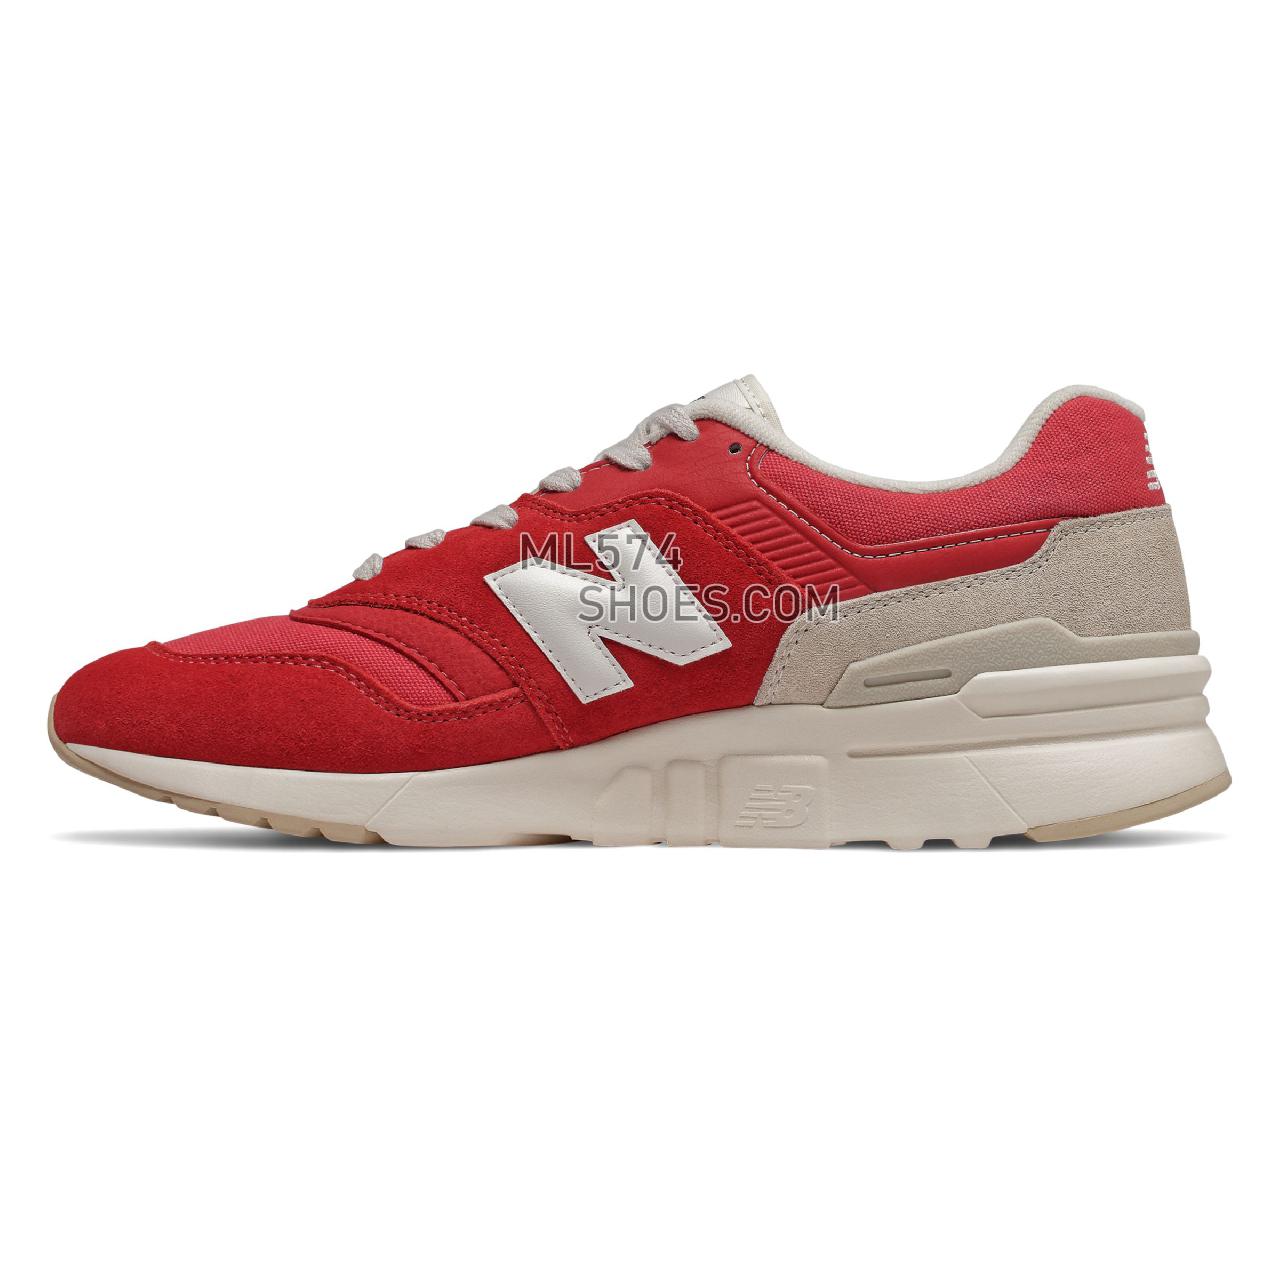 New Balance 997H - Men's Sport Style Sneakers - Team Red with Turtledove - CM997HBS